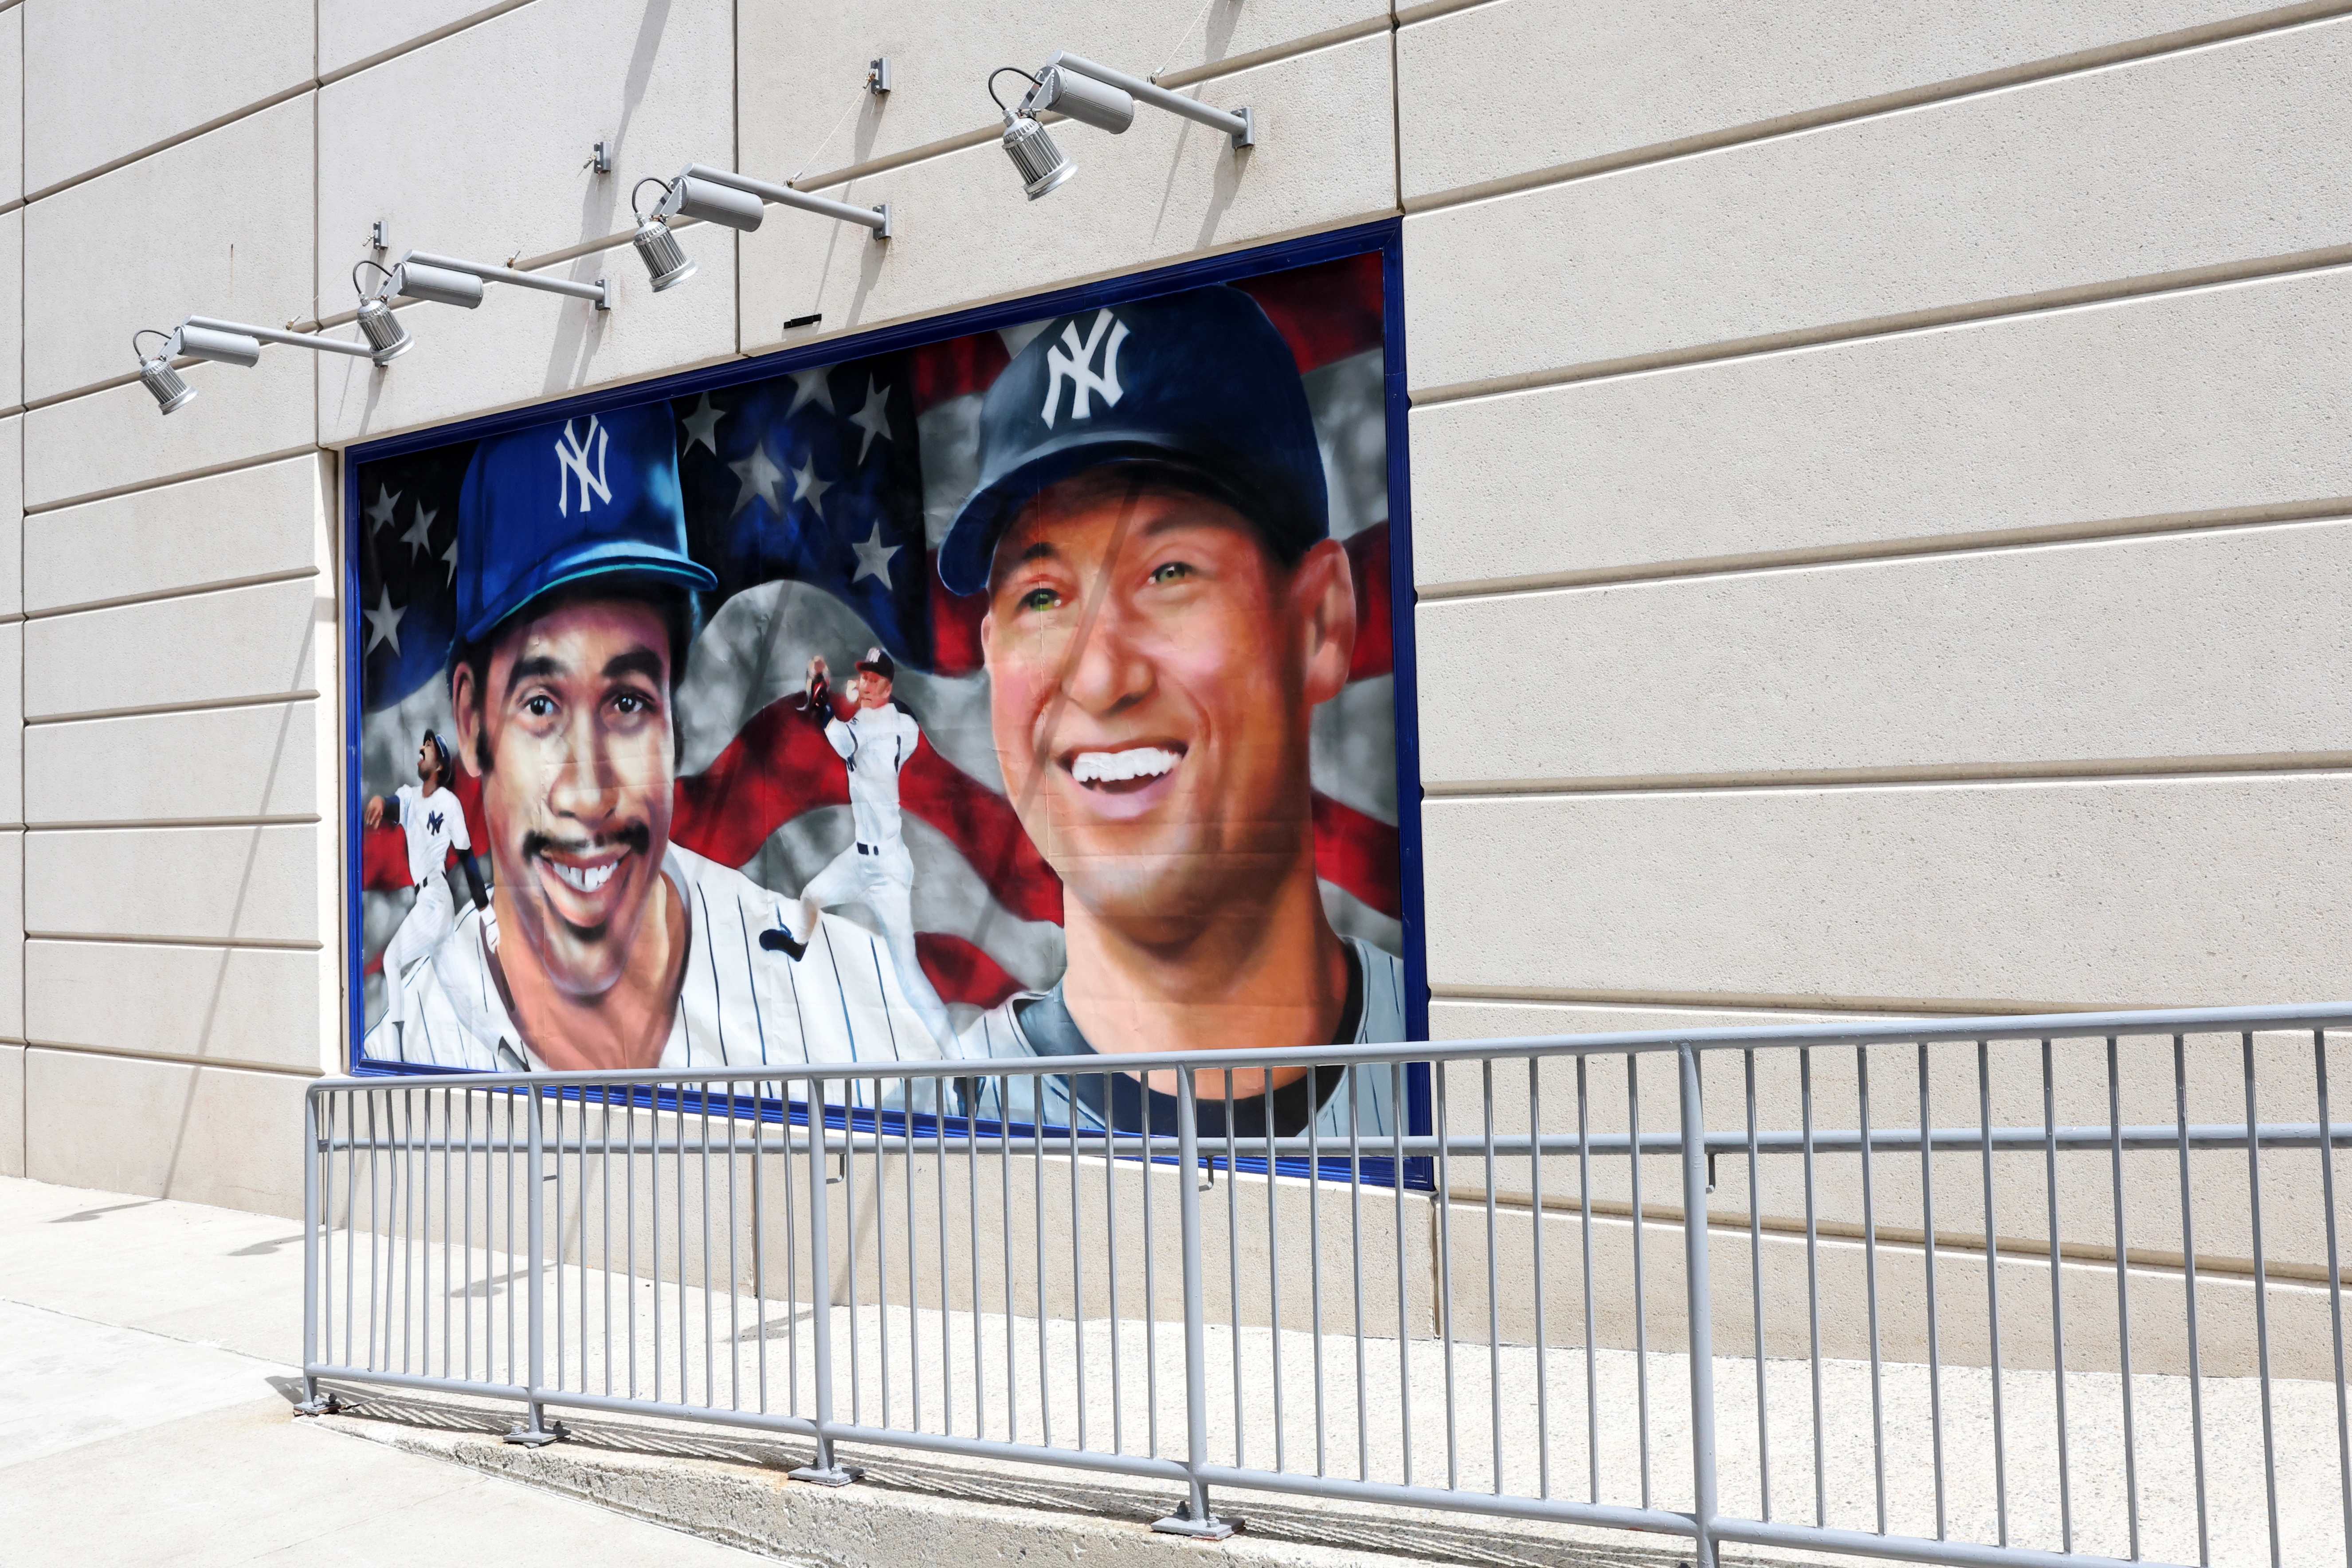 One of the murals depicting Dave Winfield and Derek Jeter.